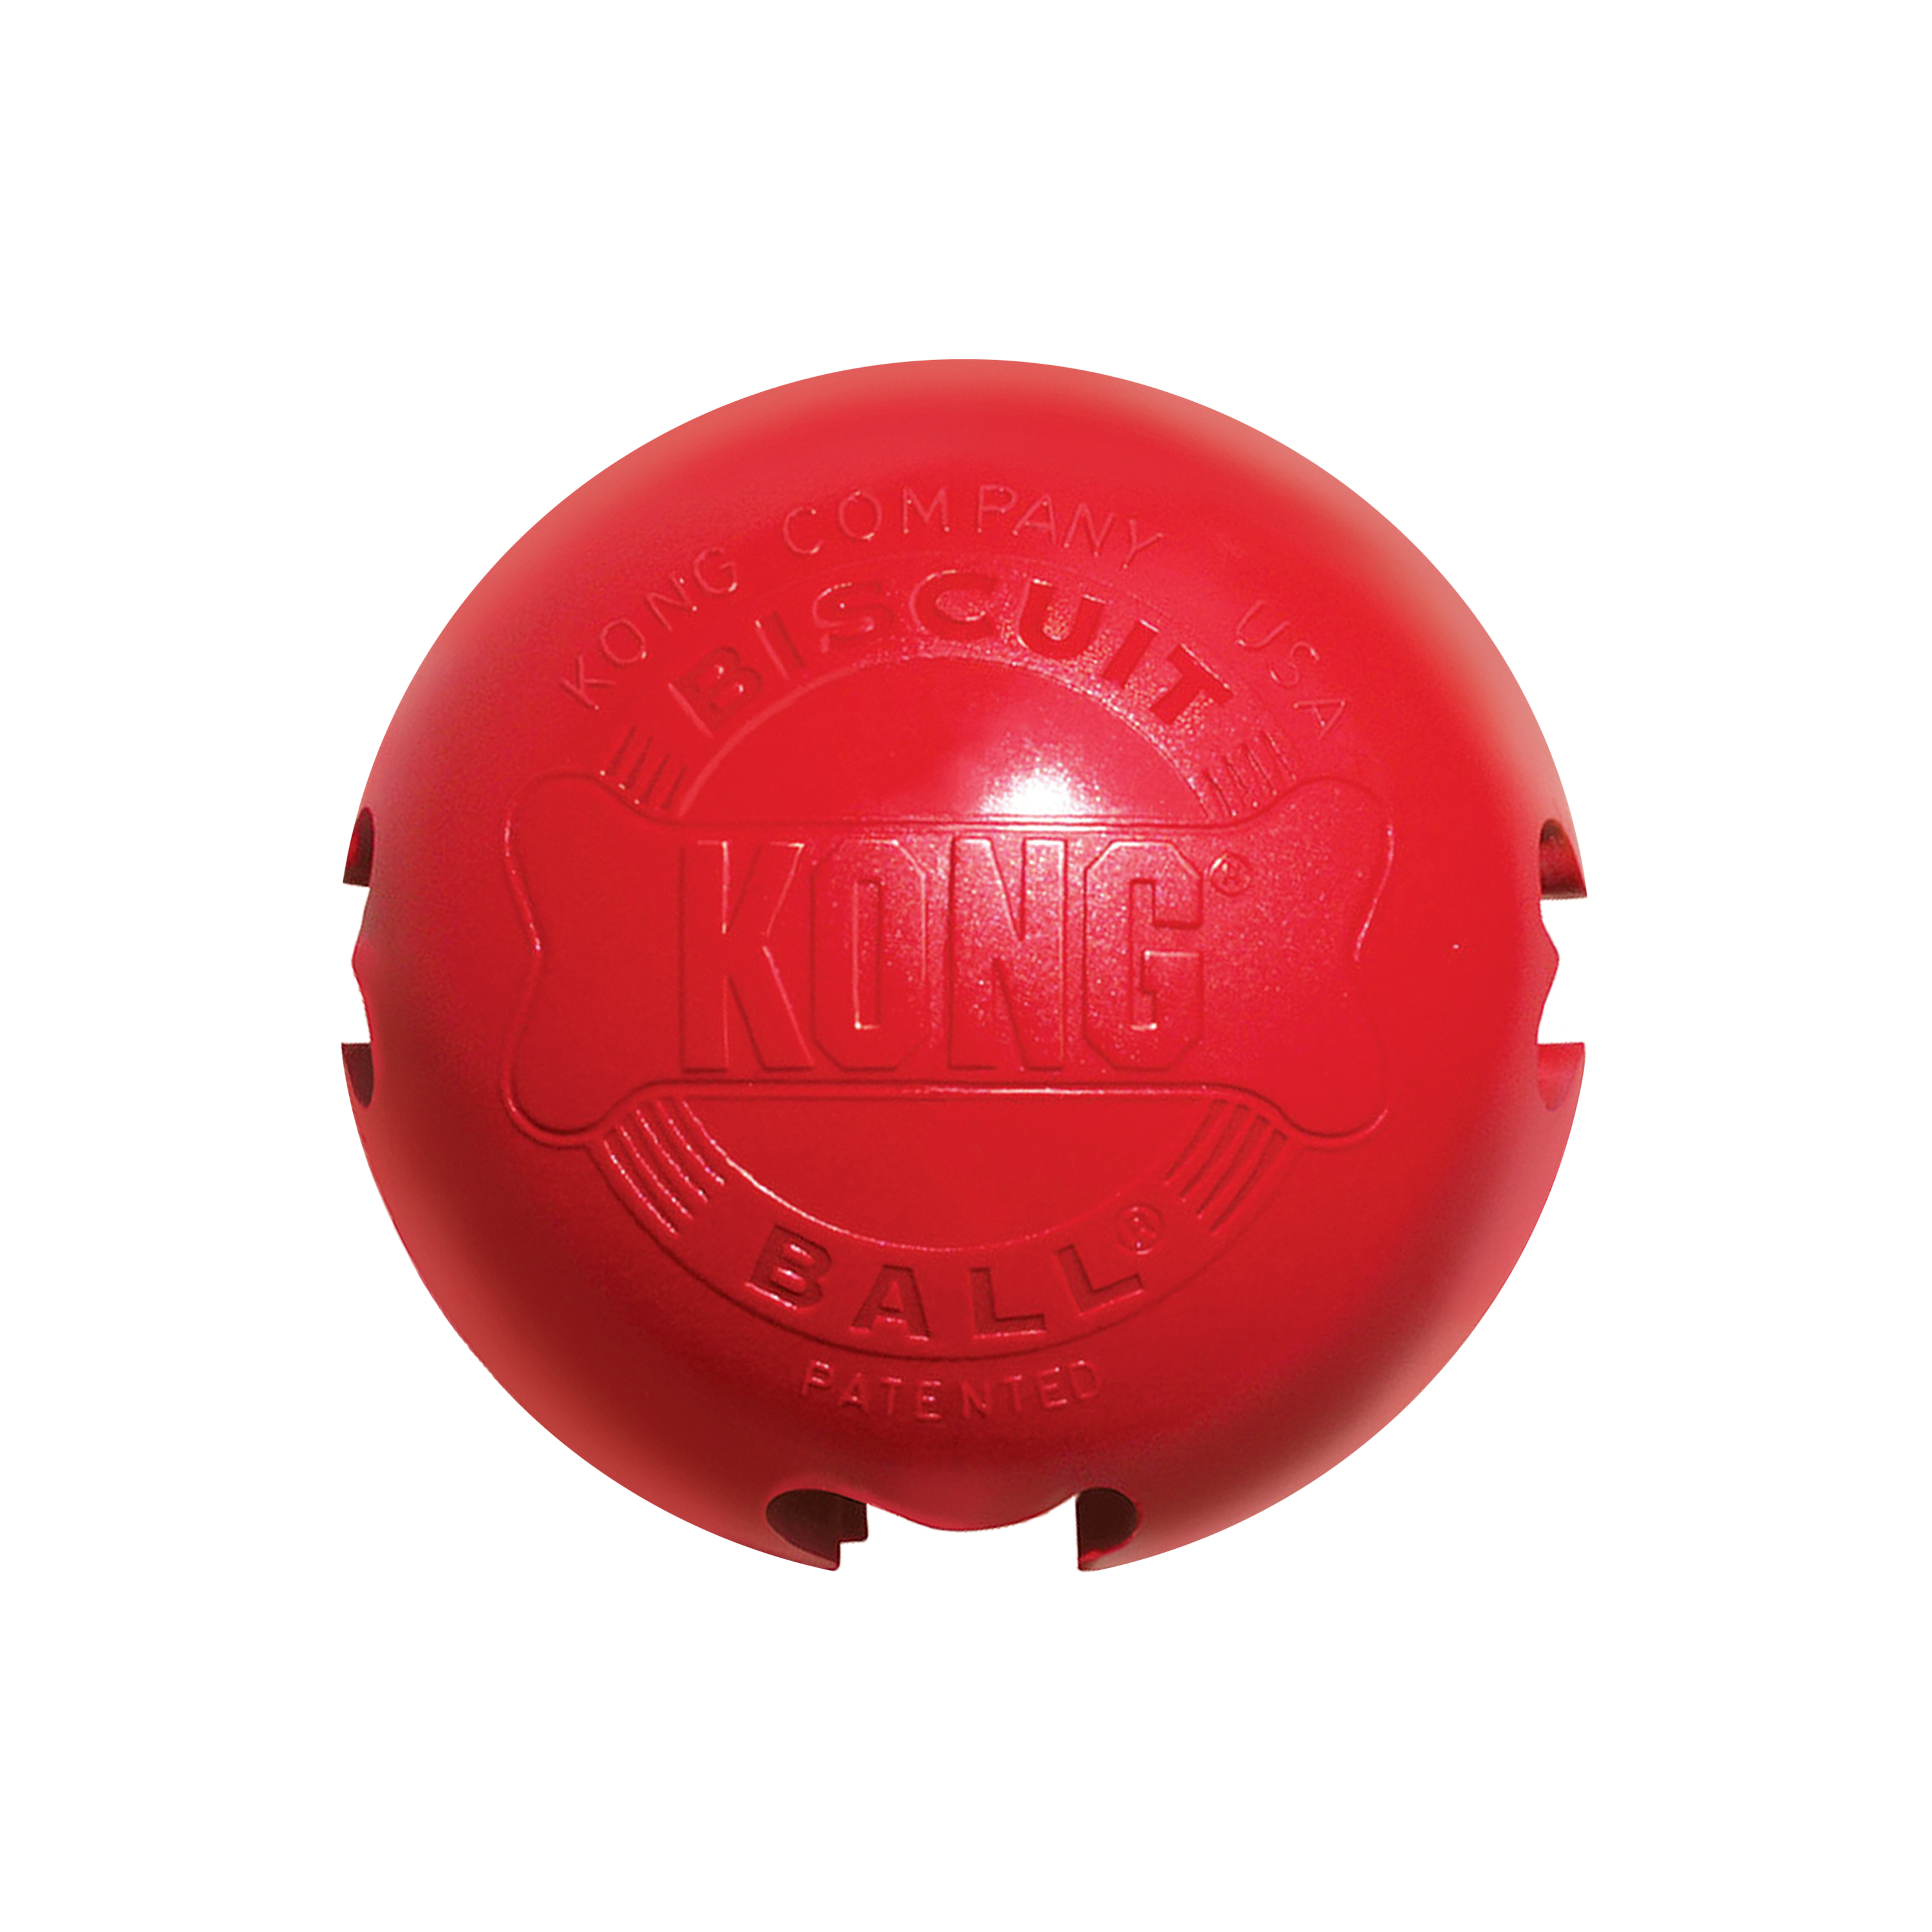 KONG Rewards Ball LARGE Bounce & Roll Treat Dispensing Dog Puzzle Toy 4.75